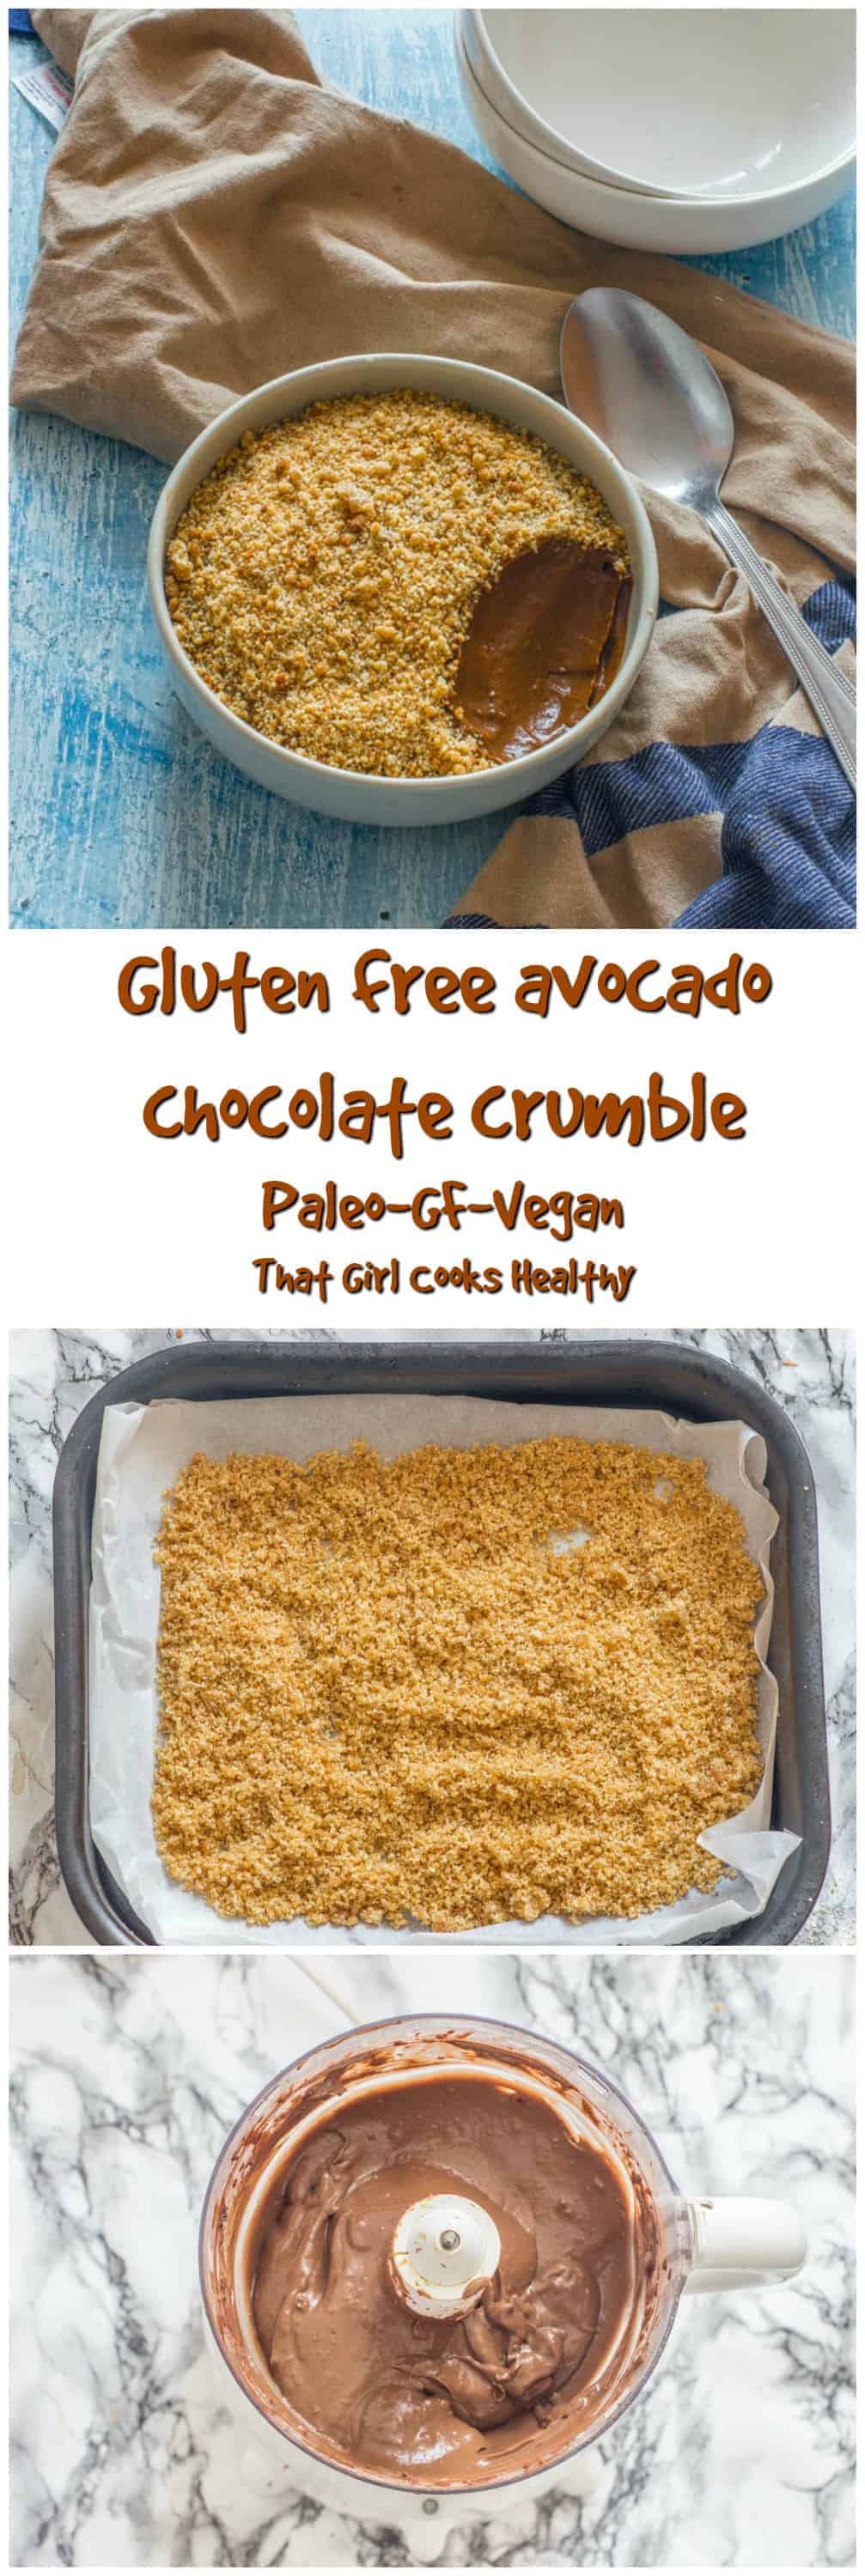 Decadent gluten free avocado chocolate crumble topped with a vegan and paleo friendly almond meal topping